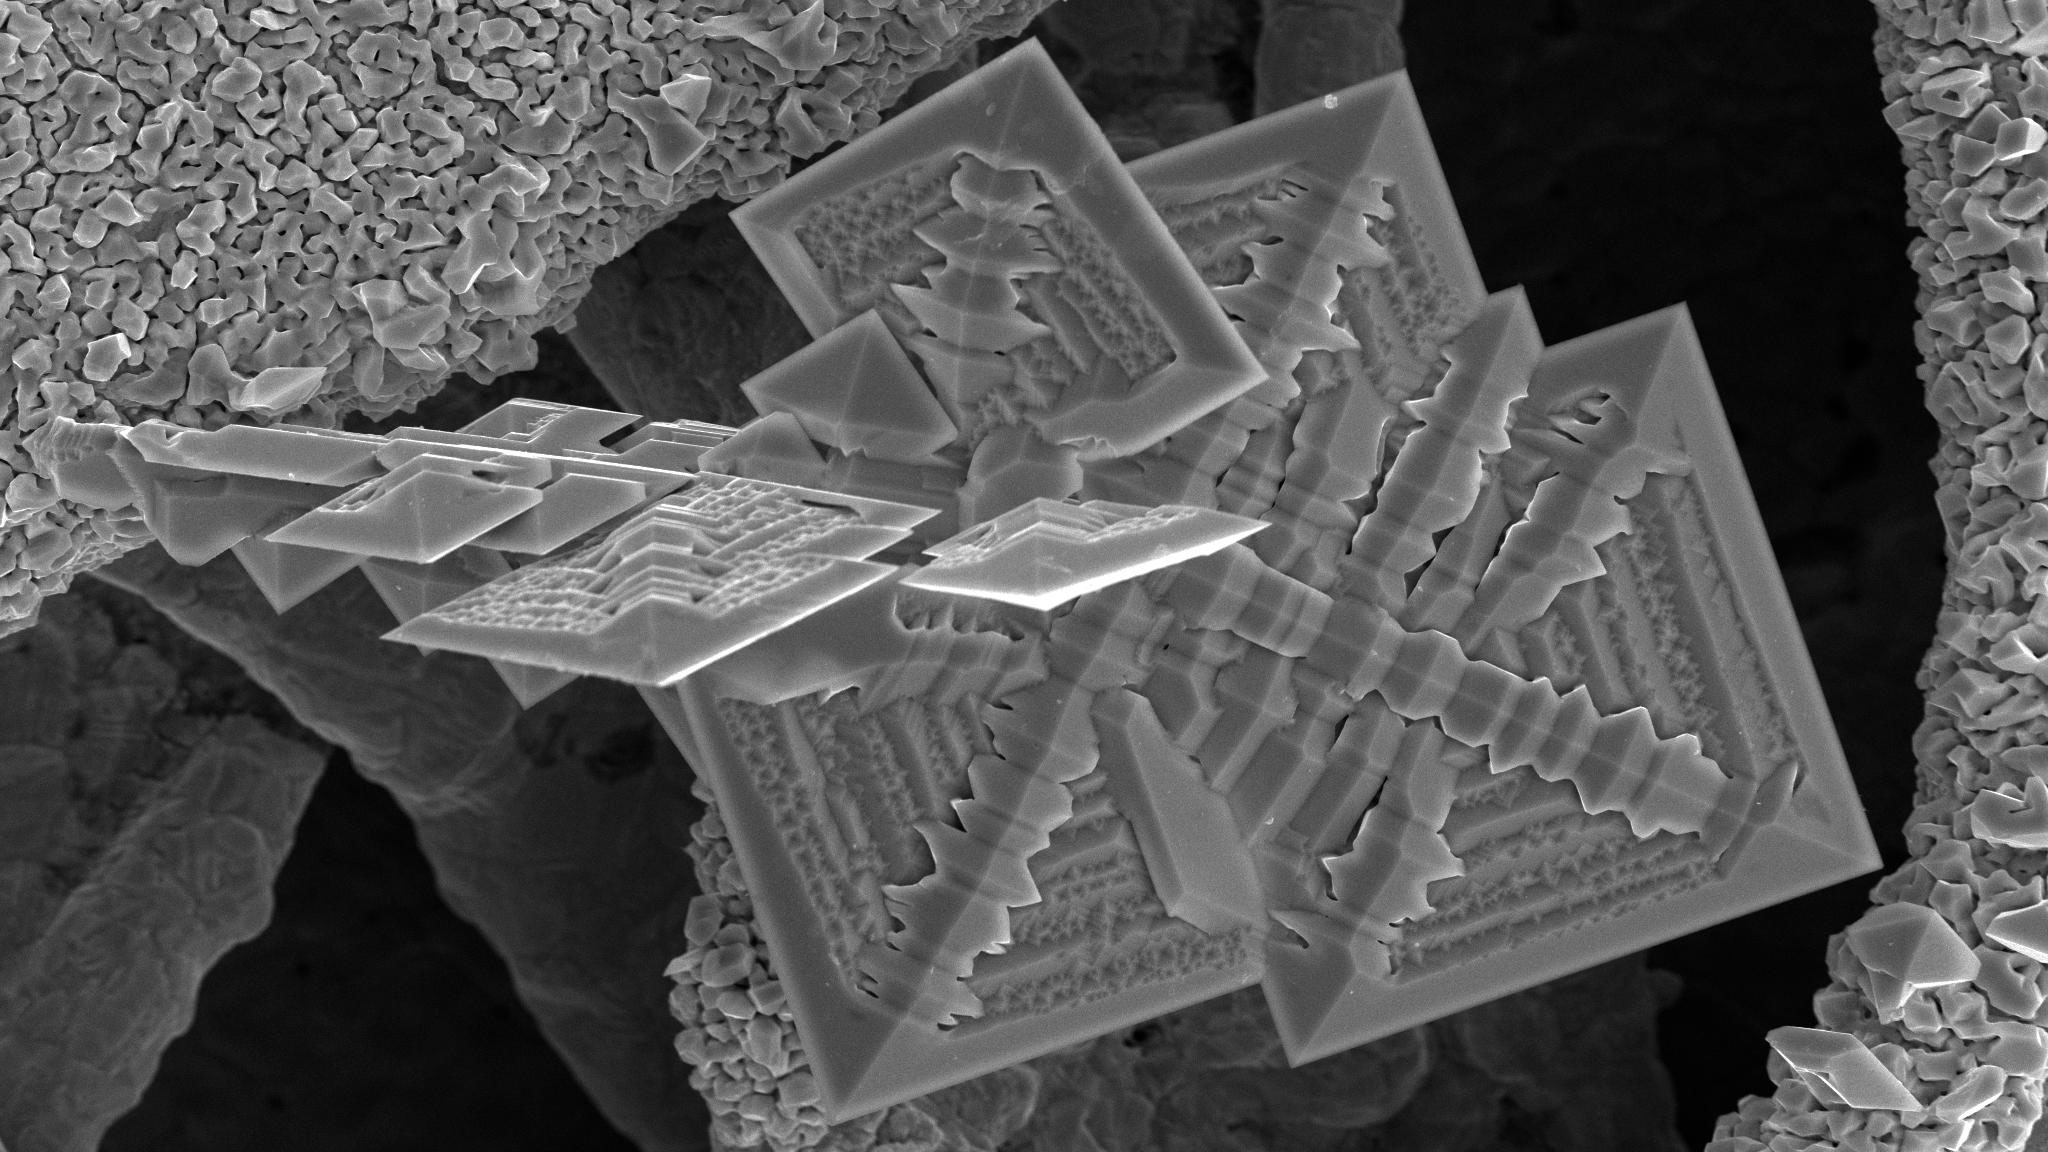 Microscope image of tin crystals, showing protruding, jagged, smooth, and stunted 3-dimensional features.